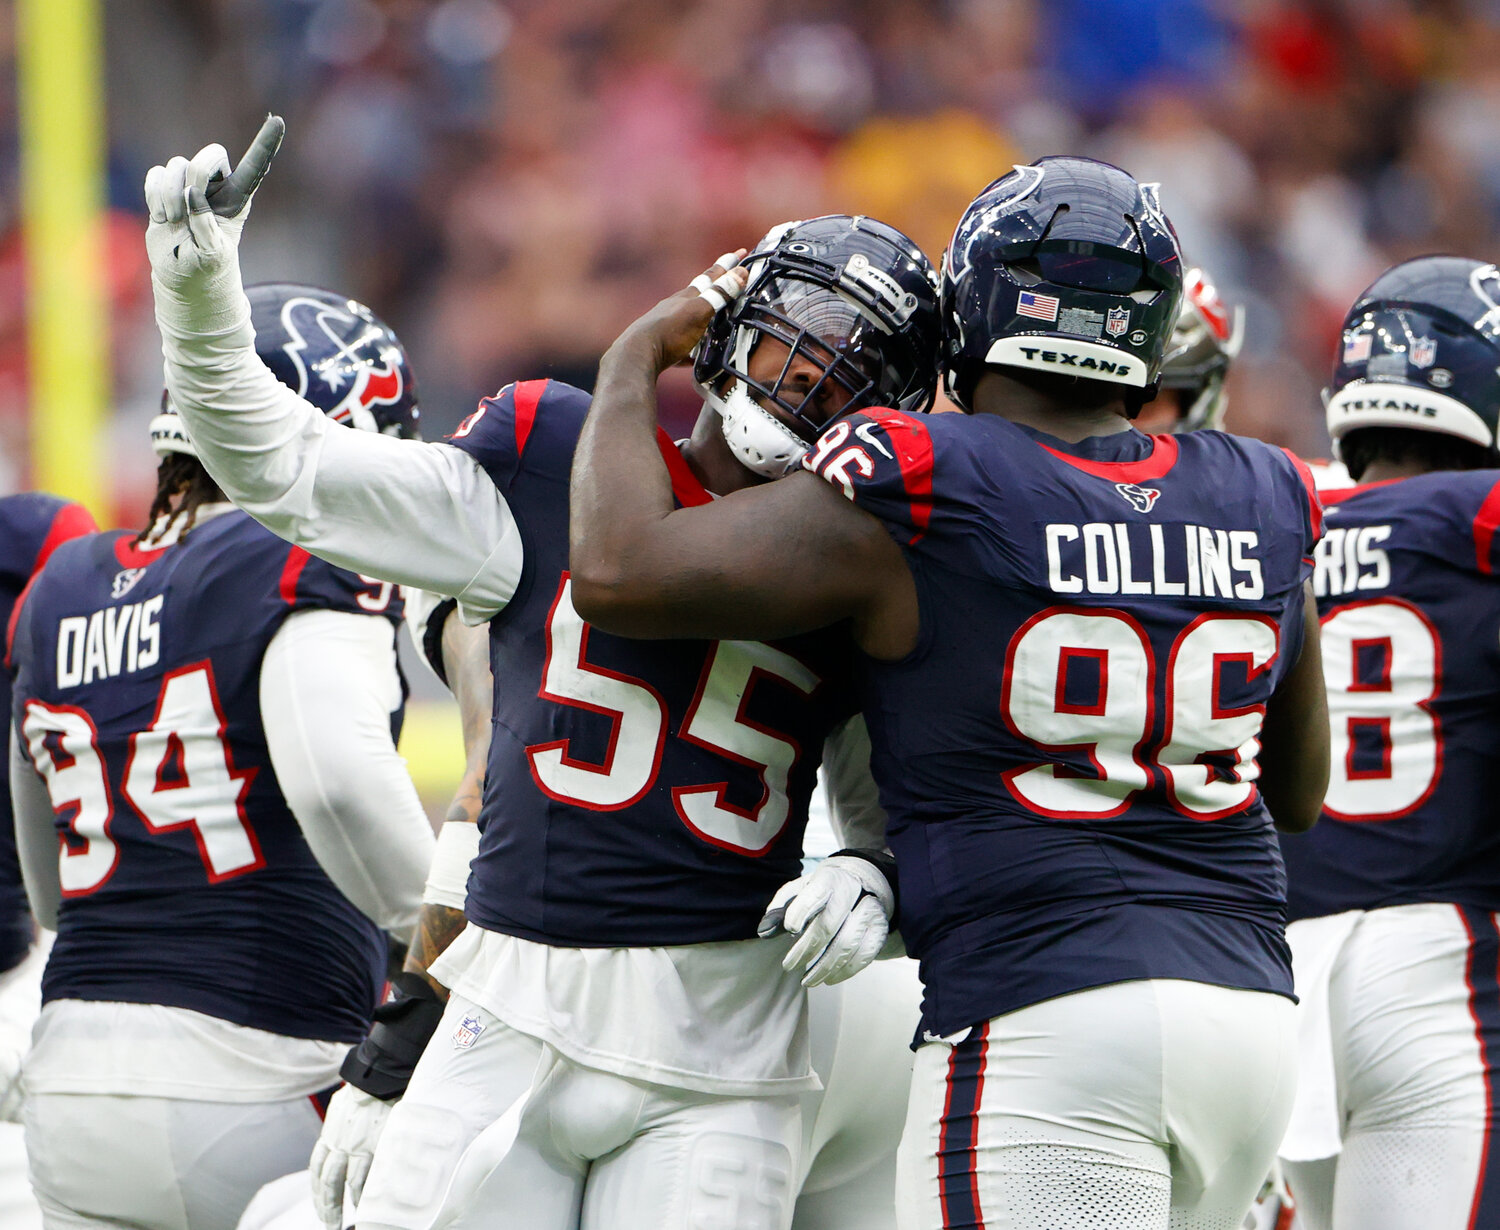 Texans defensive end Jerry Hughes (55) celebrates after a tackle for loss during an NFL game between the Houston Texans and the Tampa Bay Buccaneers on November 5, 2023 in Houston.